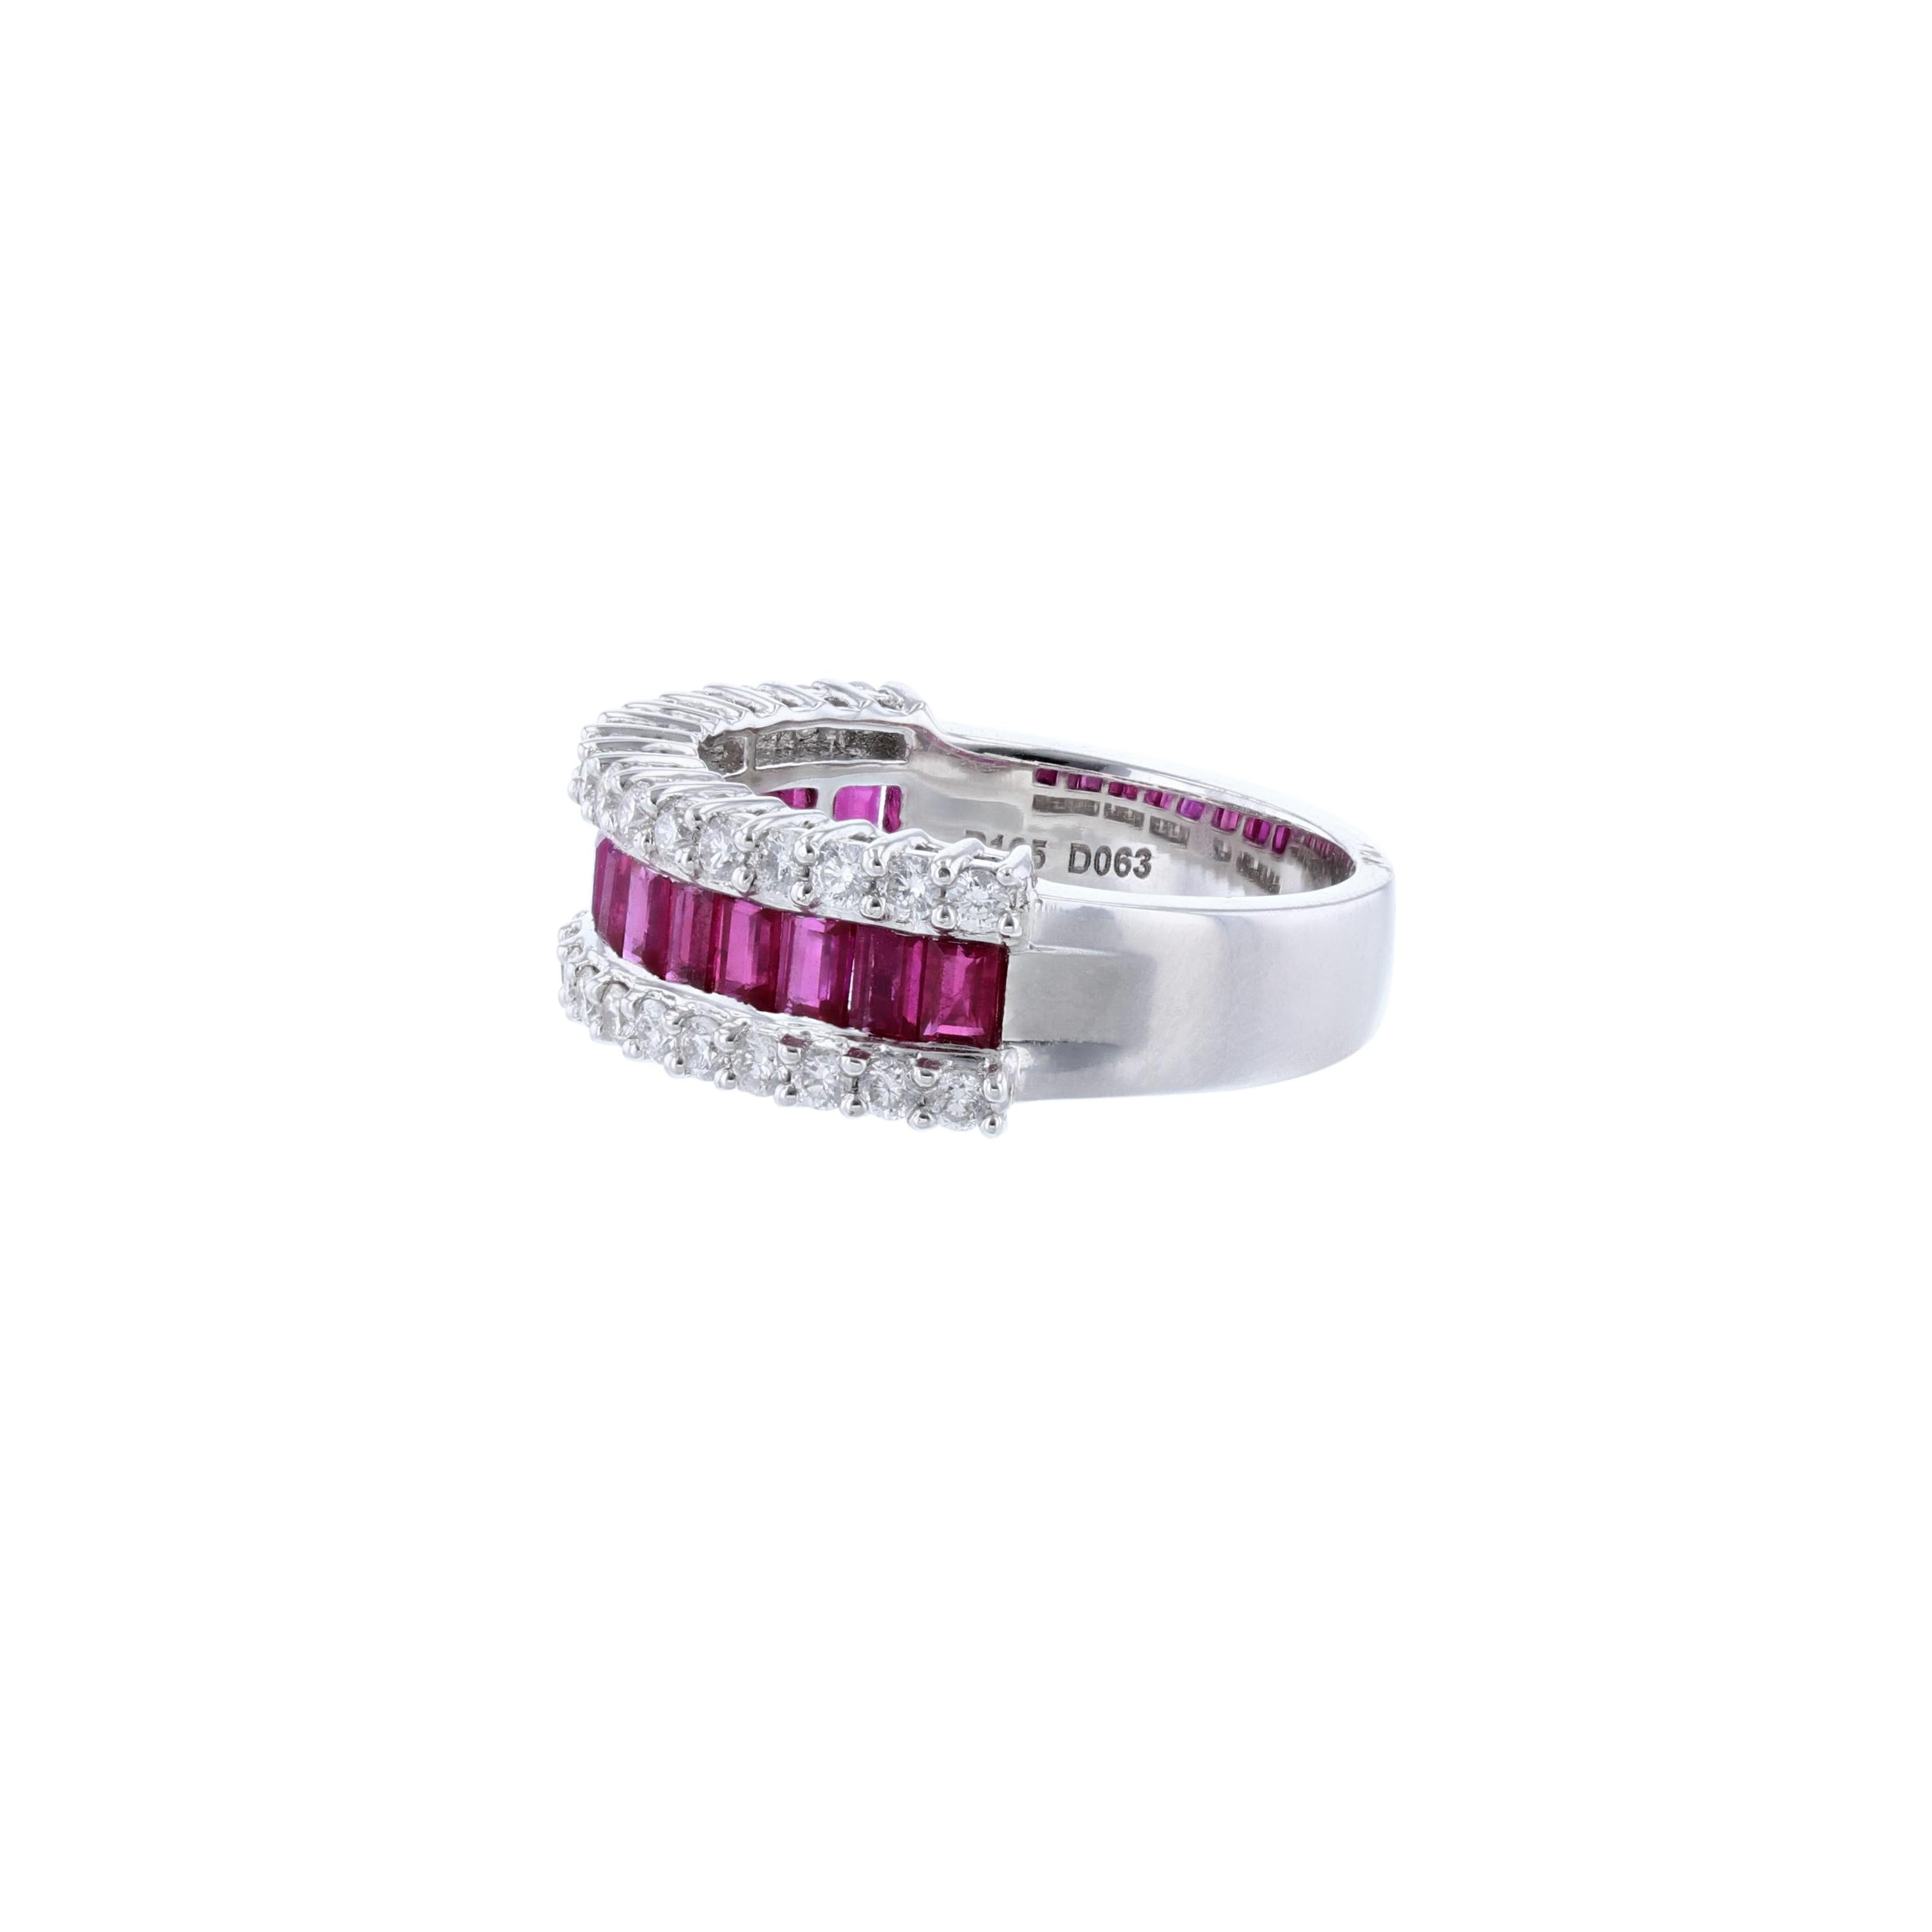 This ring is made in 18k white gold featuring 14 baguette cut, channel set rubies weighing 1.65 carat. Surrounded by 34 round cut, prong set diamonds weighing 0.63 carat. With a color grade (H) and clarity grade (SI1). 